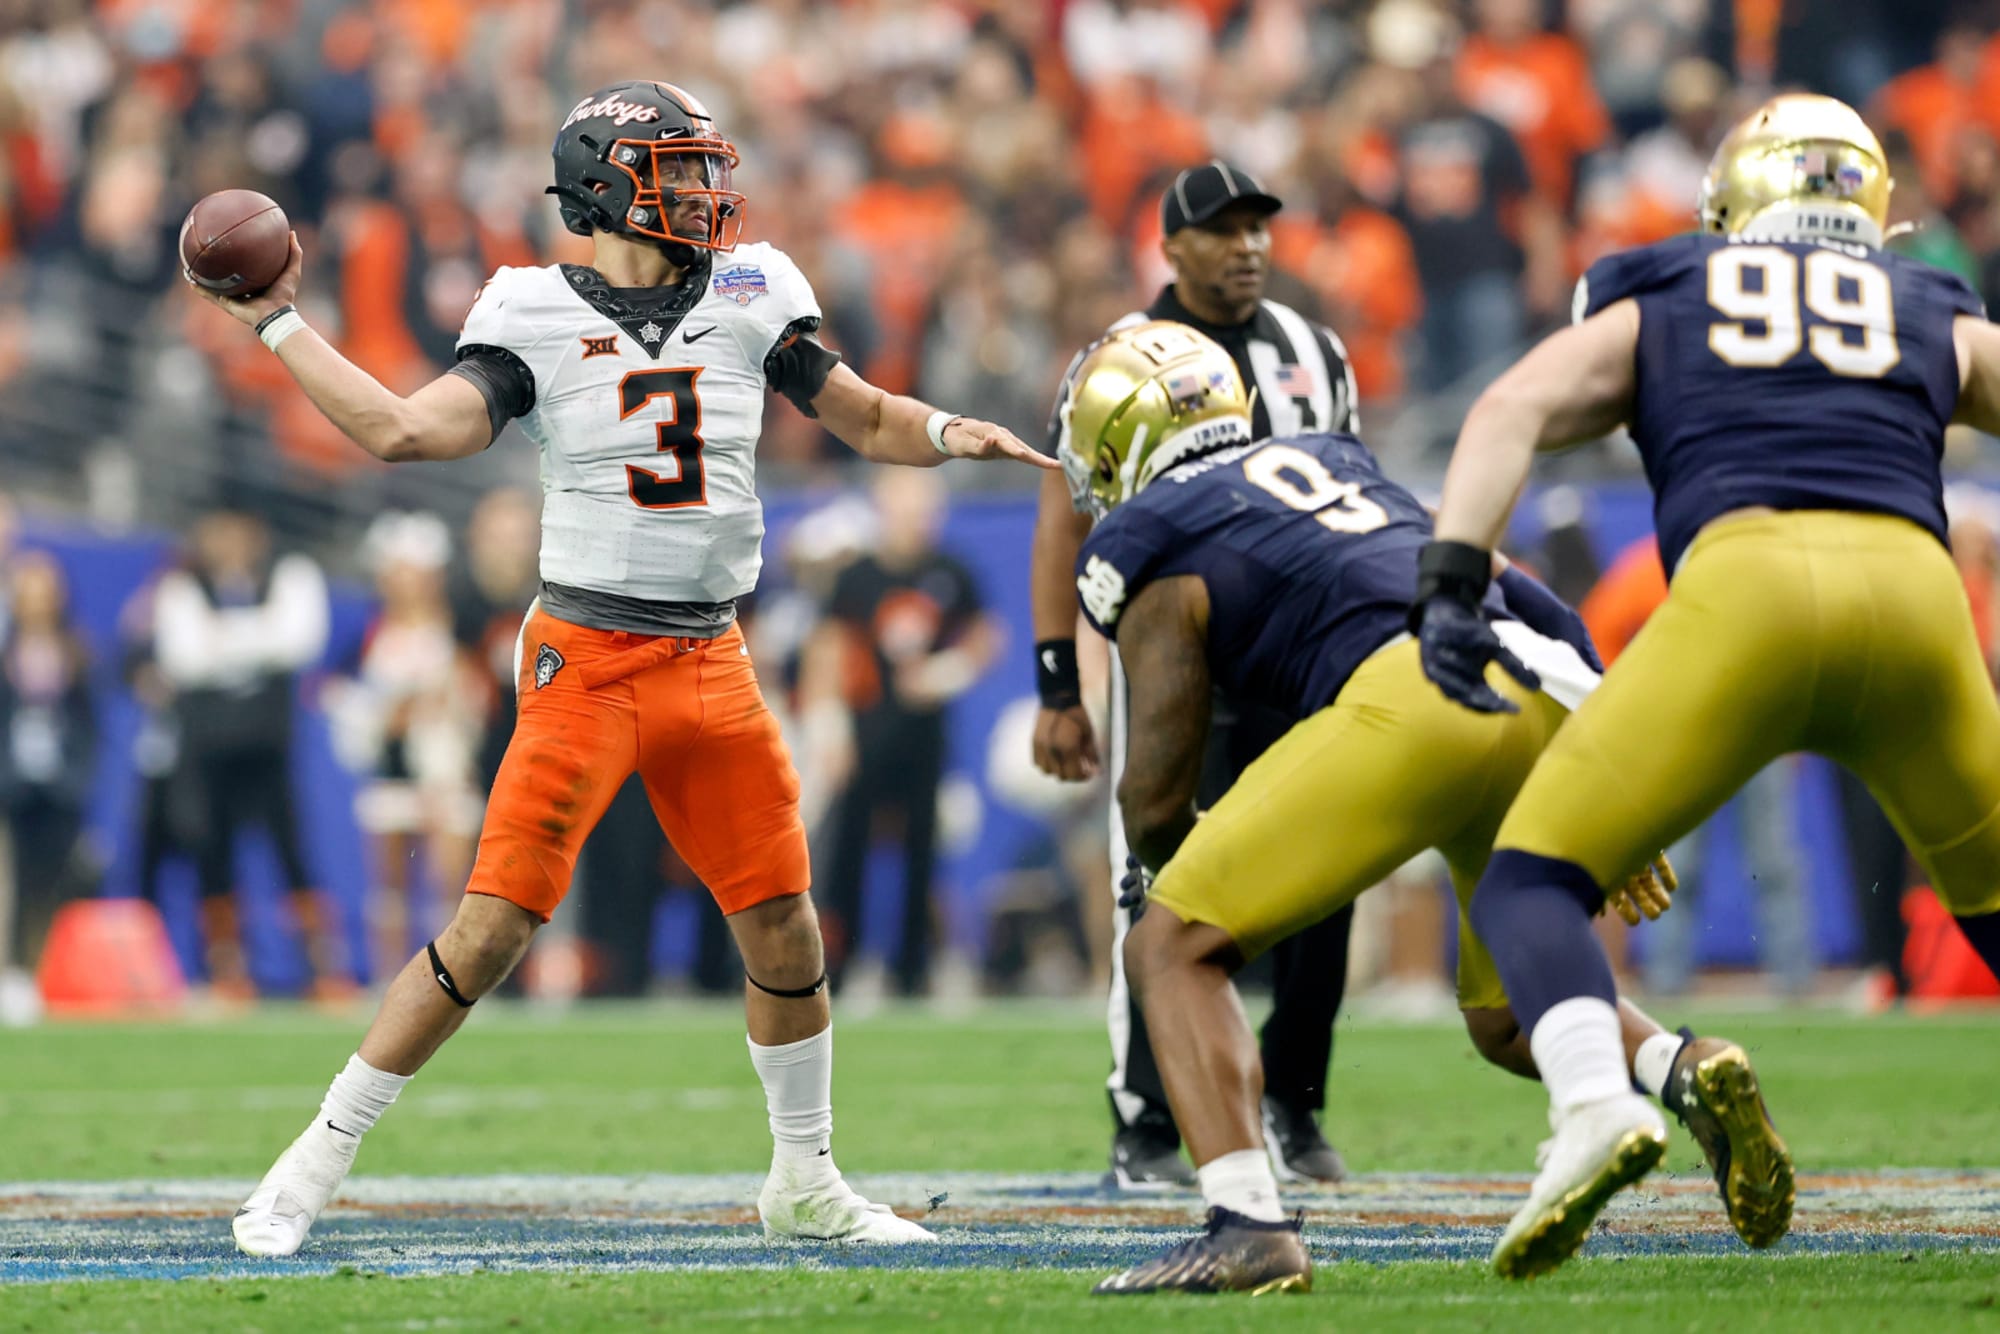 Oklahoma State football schedule 2022: Way-too-early predictions